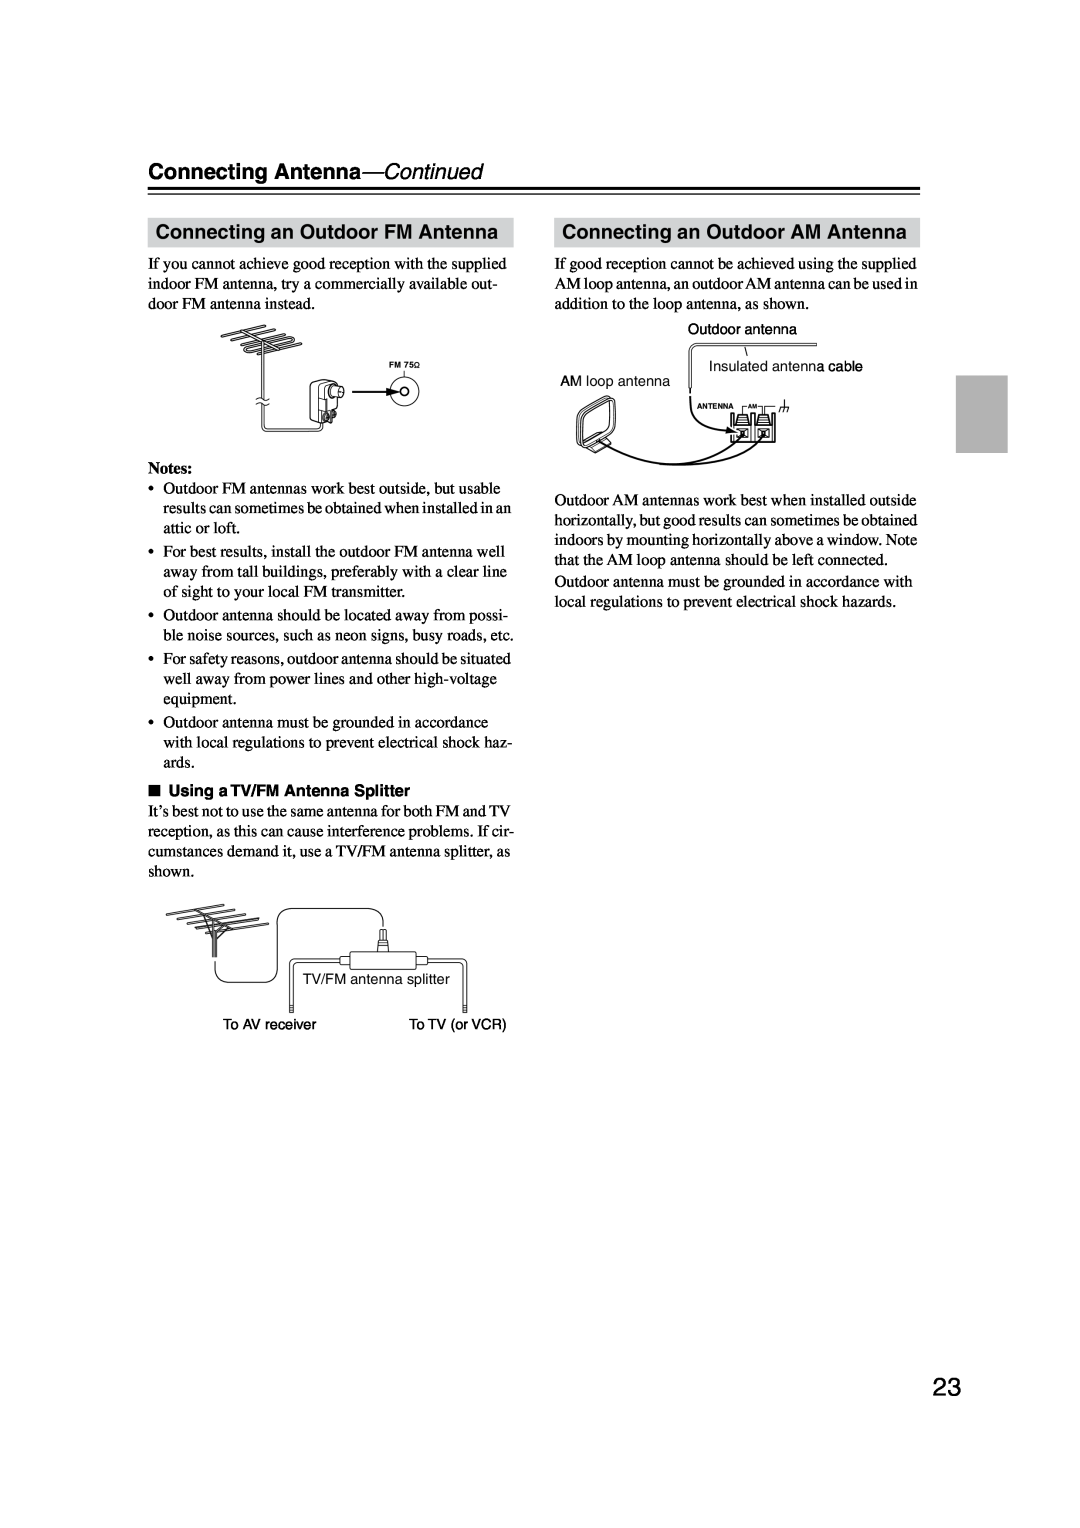 Onkyo HT-S590 Connecting Antenna-Continued, Connecting an Outdoor FM Antenna, Connecting an Outdoor AM Antenna 